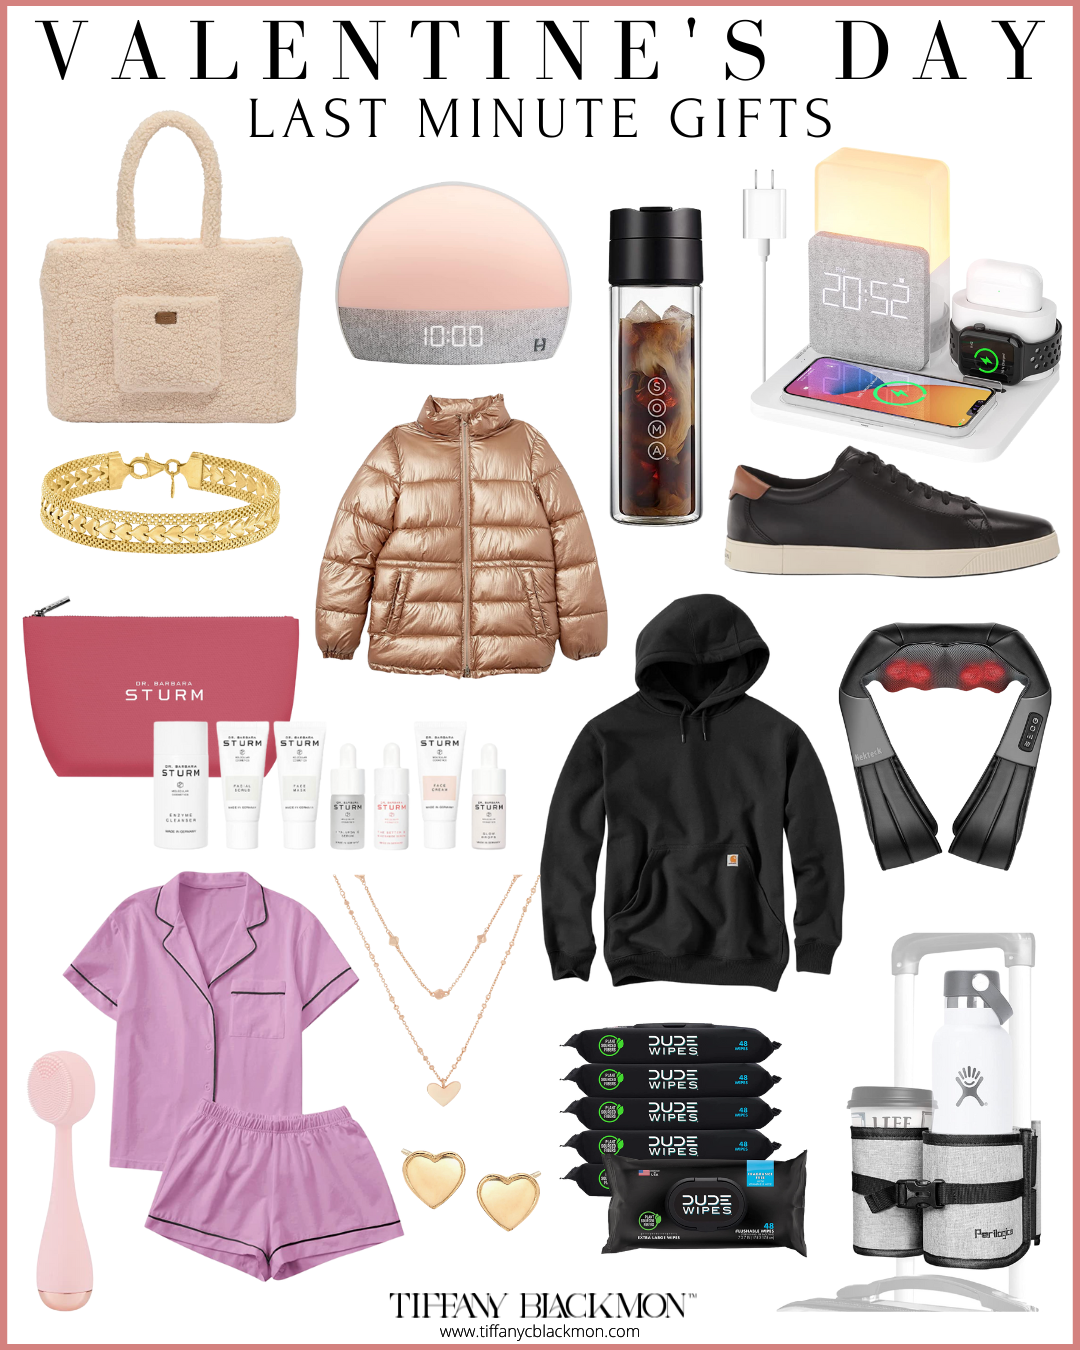 Last Minute Valentine's Day Gift Guide | Curbside Pickup Retailers and Gifts
#gifts #valentines #valentinesday #giftguide #amazon #amazonfinds 